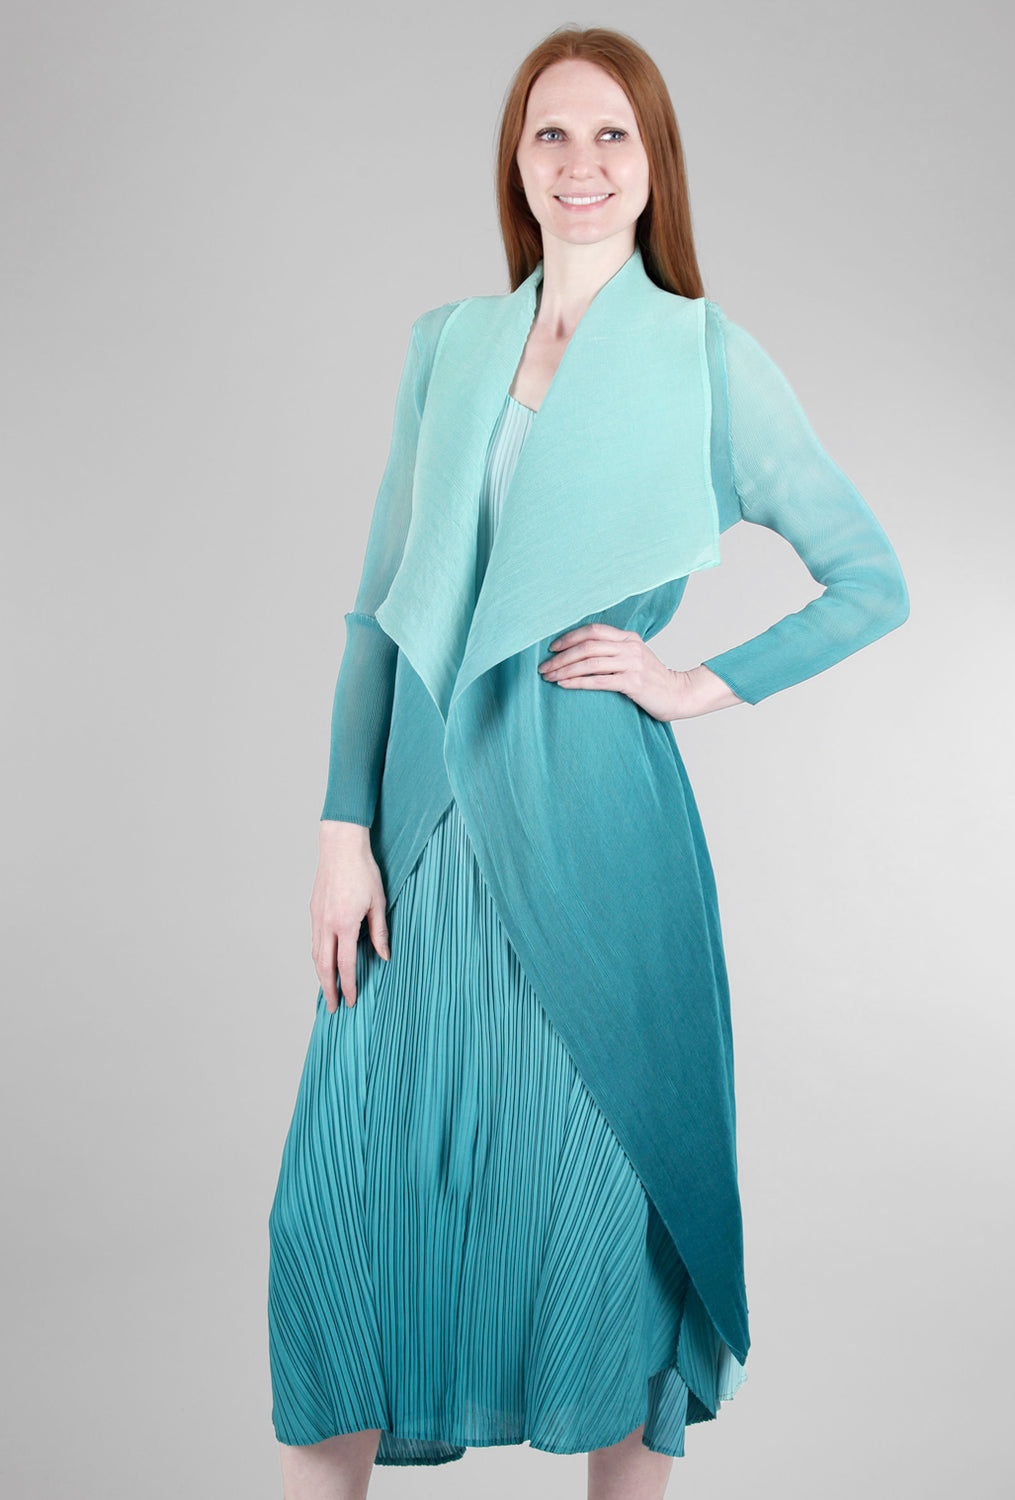 Long Collare Jacket, Lake House Ombre